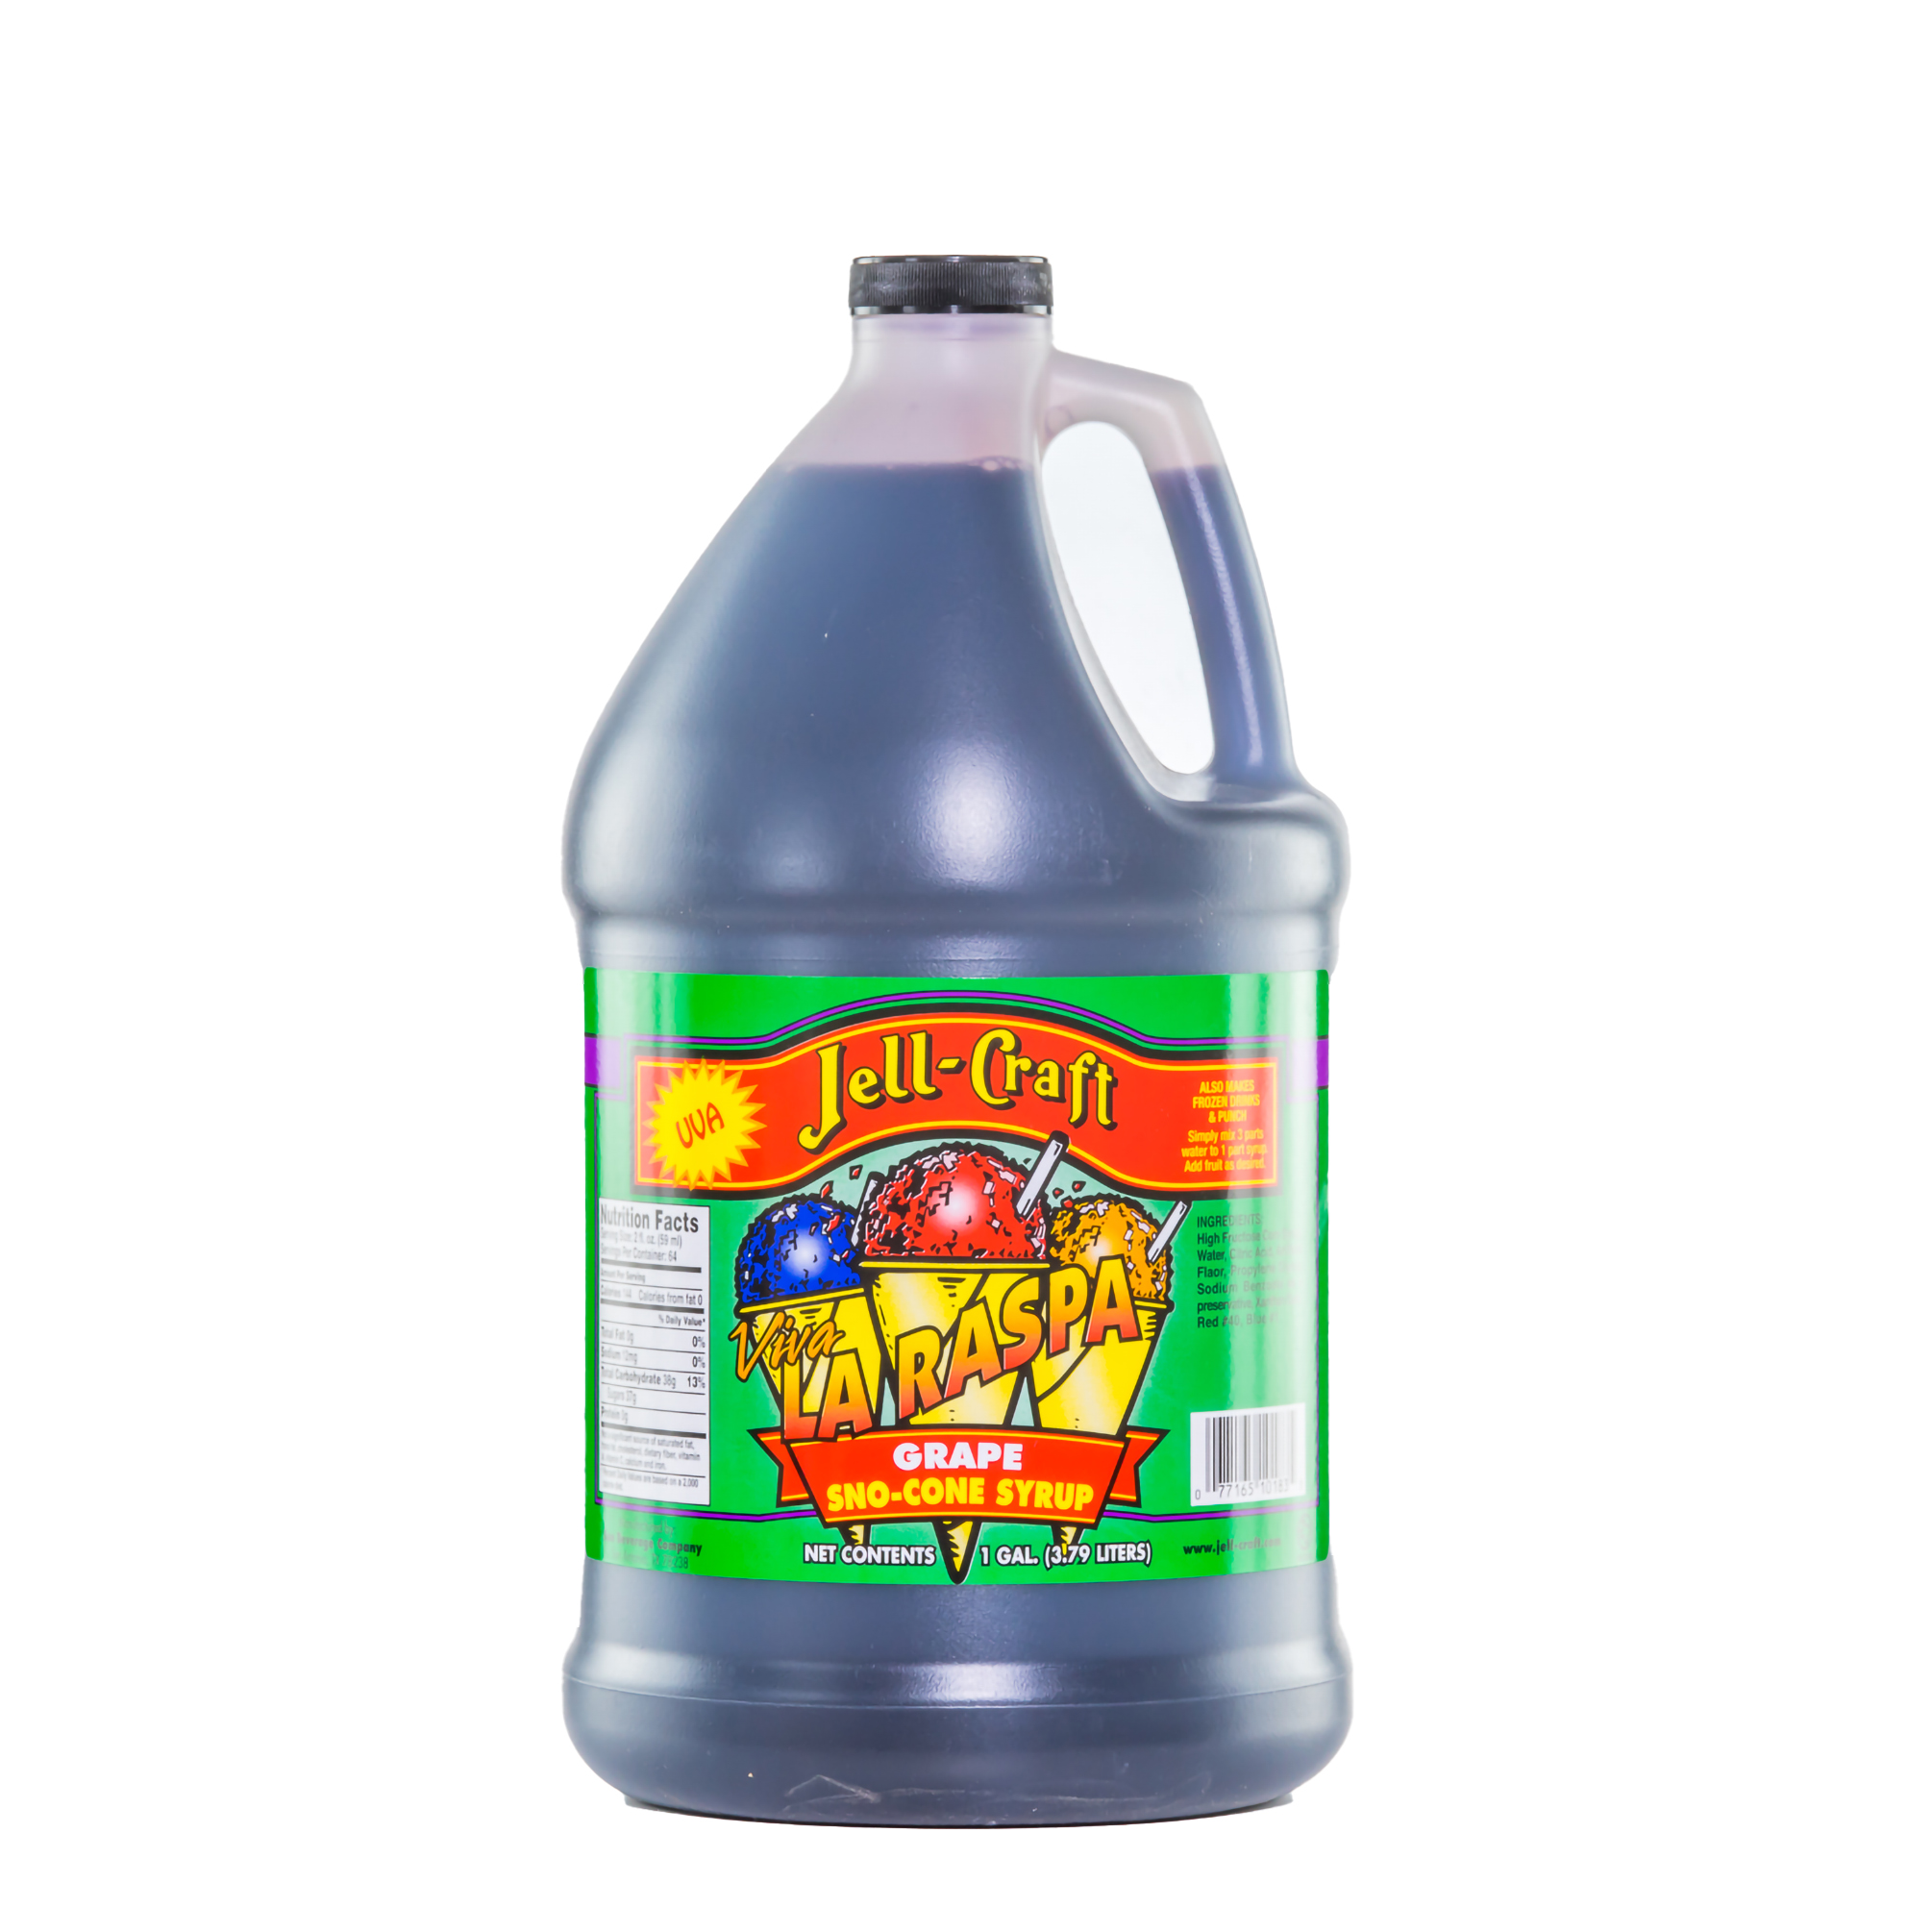 Snow Cone Syrup Shaved Ice - Twenty Two Flavors, 1 Gallon Jug